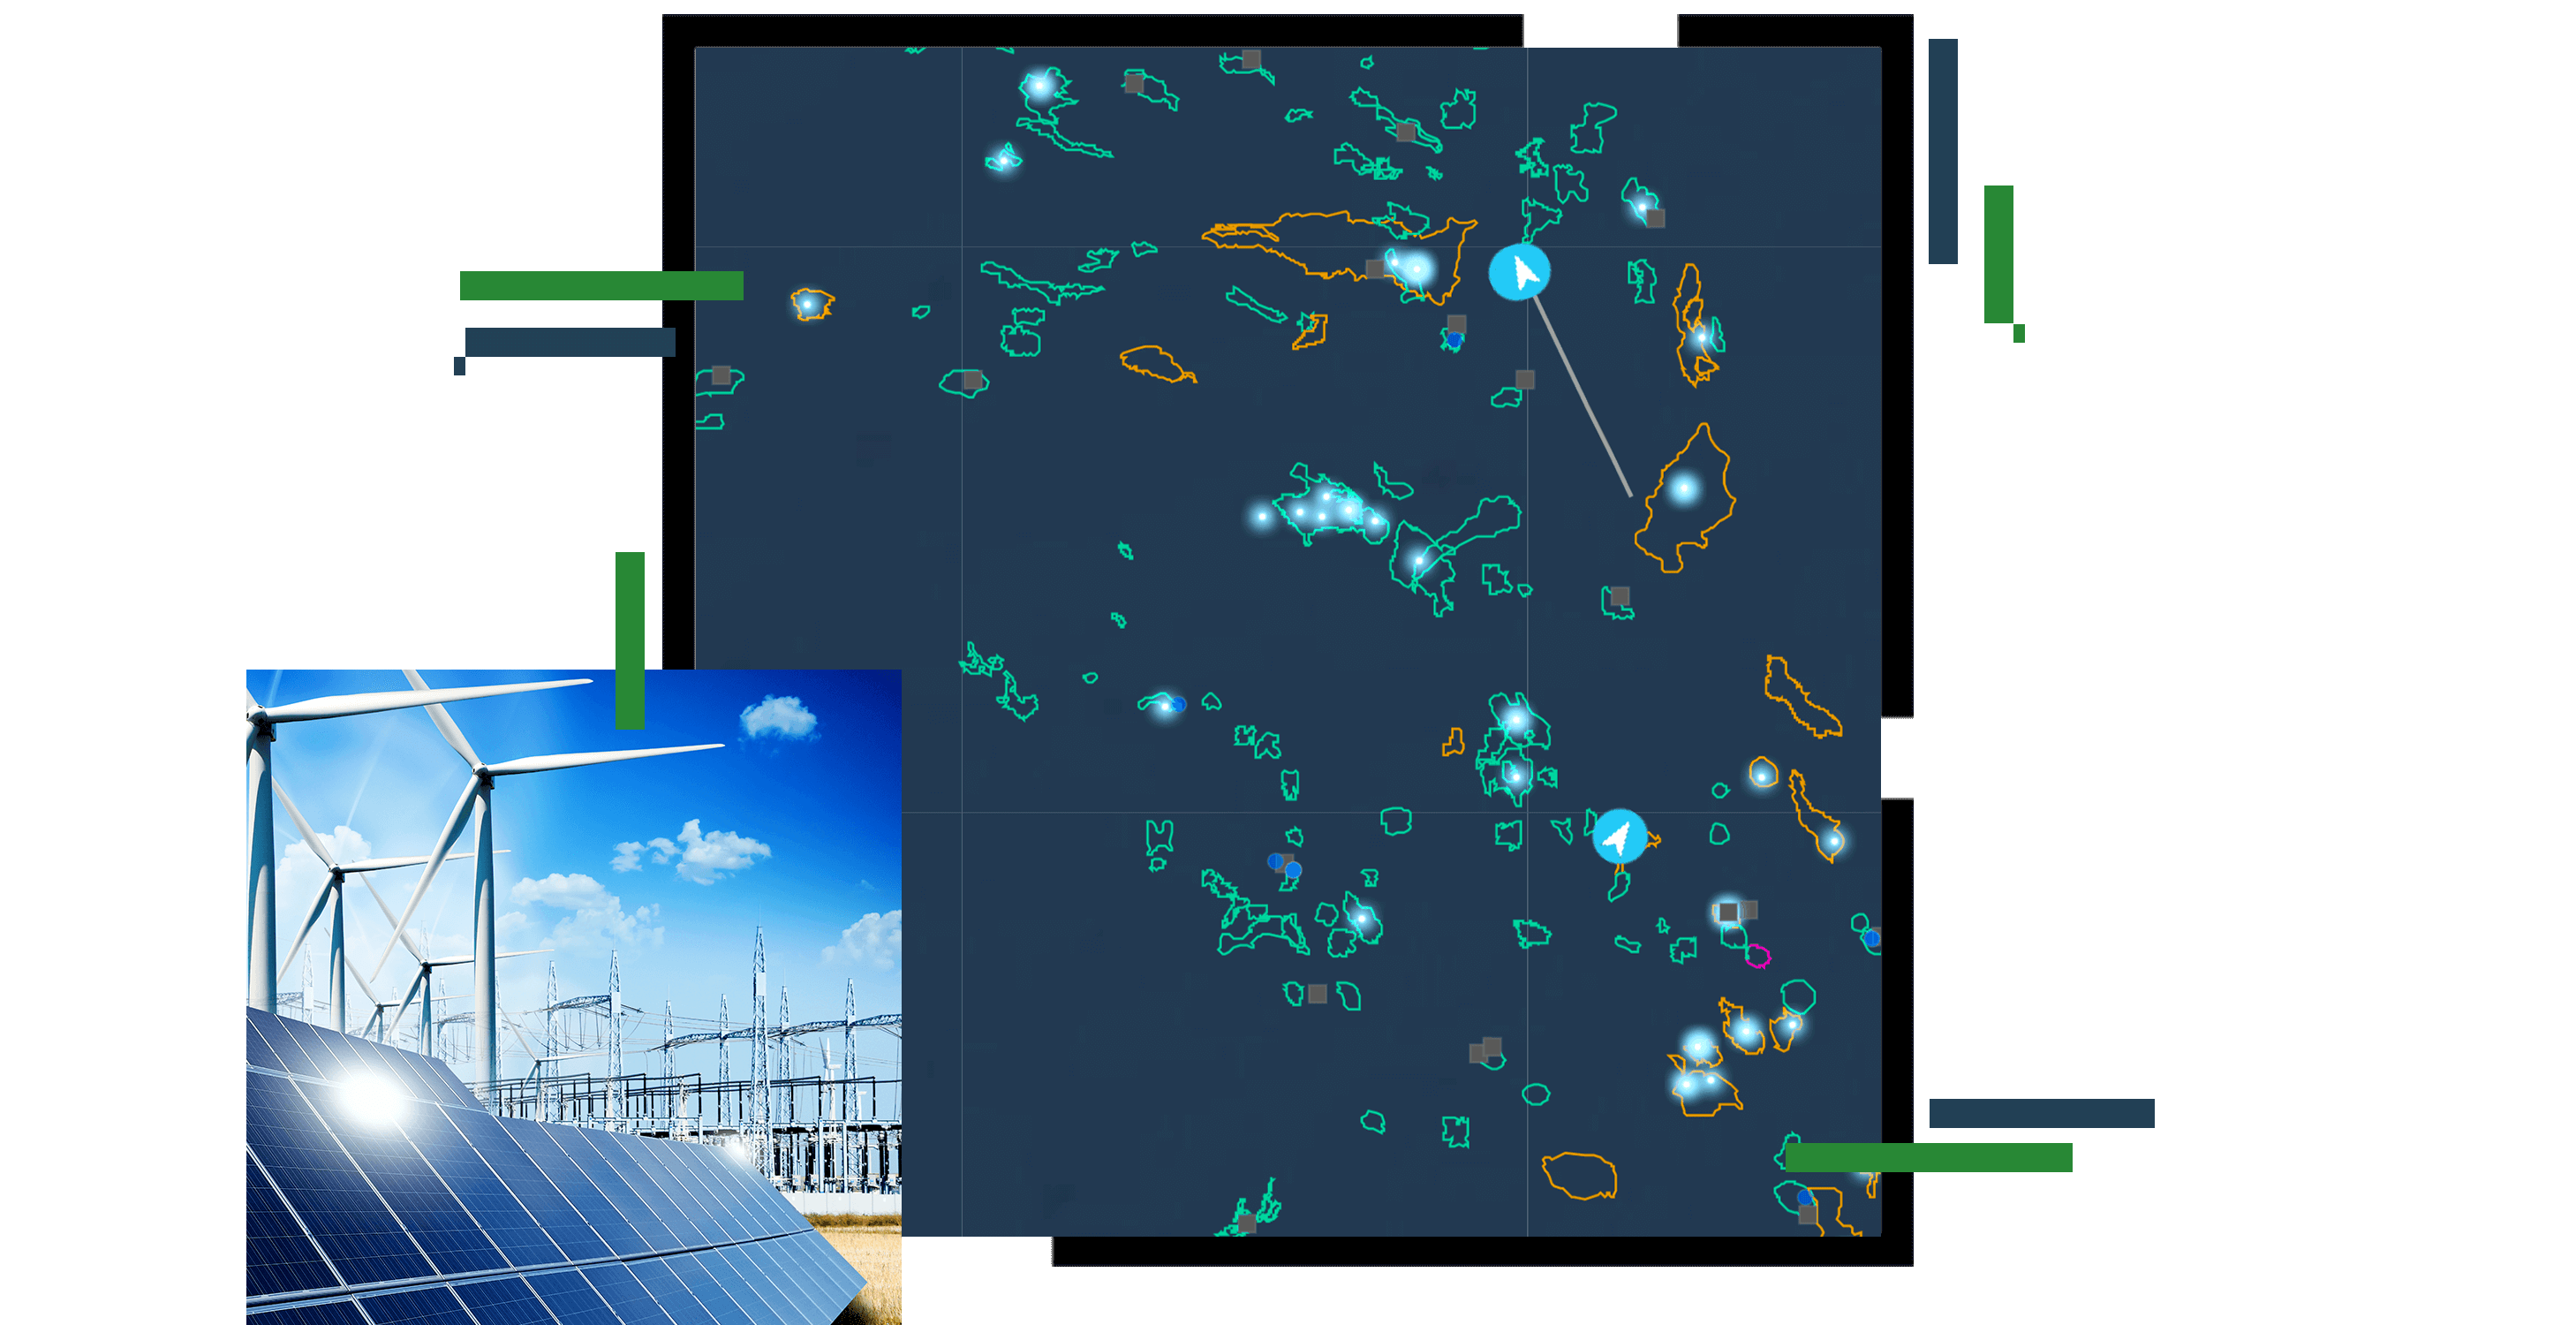 A concentration map of scattered islands on a dark blue ocean scattered with glowing white points, and a small photo of wind turbines and solar panels shining under a bright blue sky